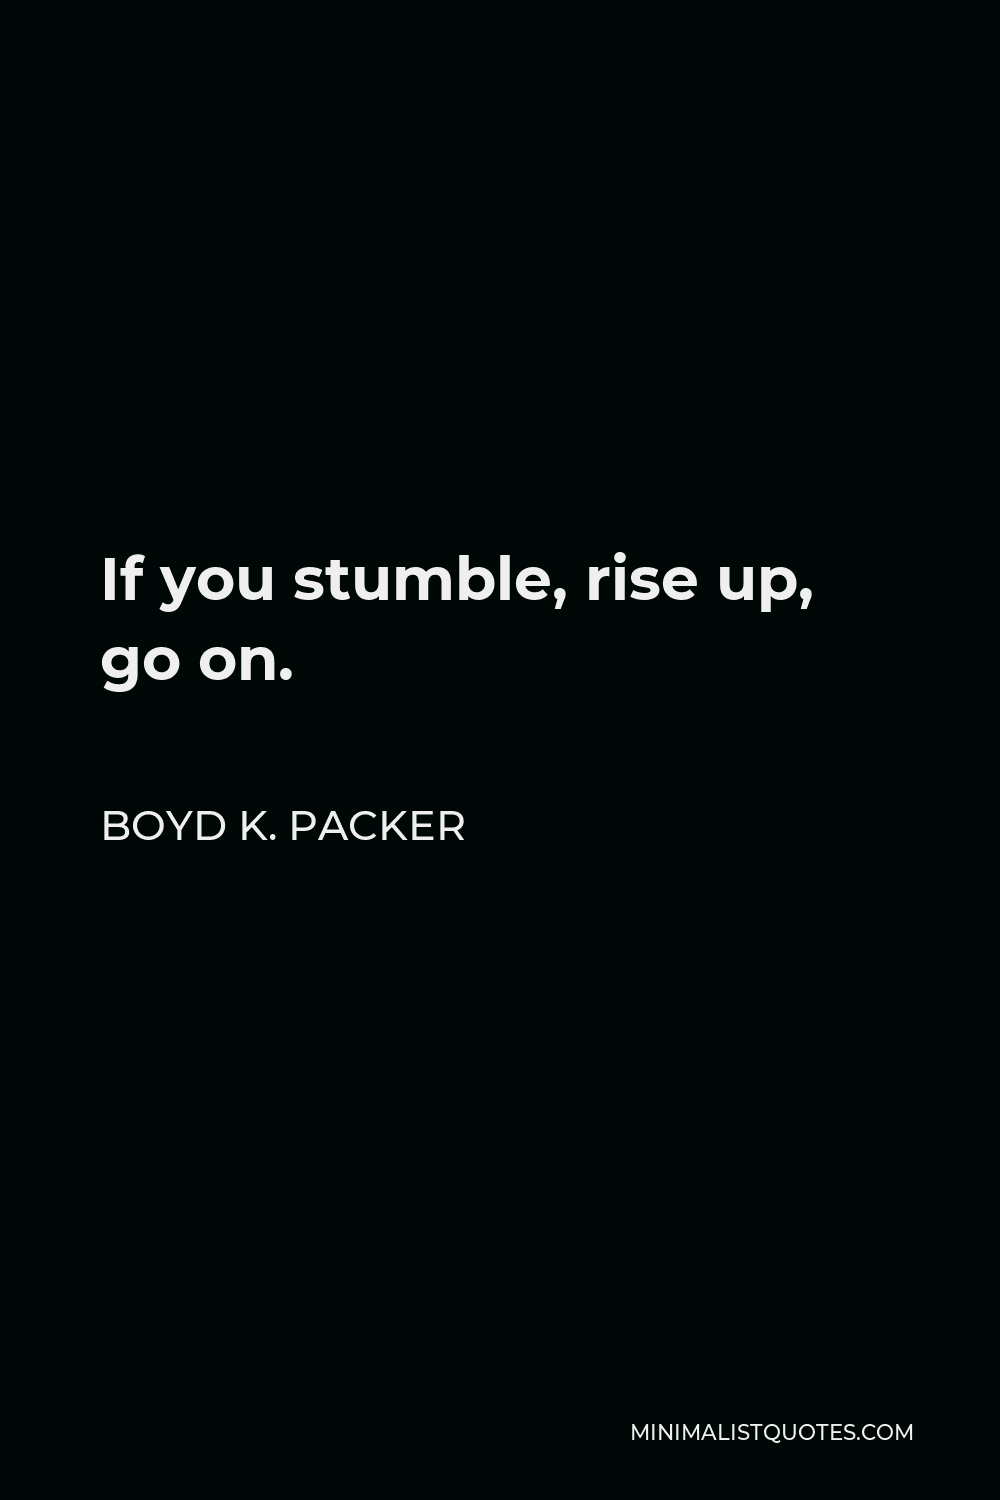 Boyd K. Packer Quote - If you stumble, rise up, go on.